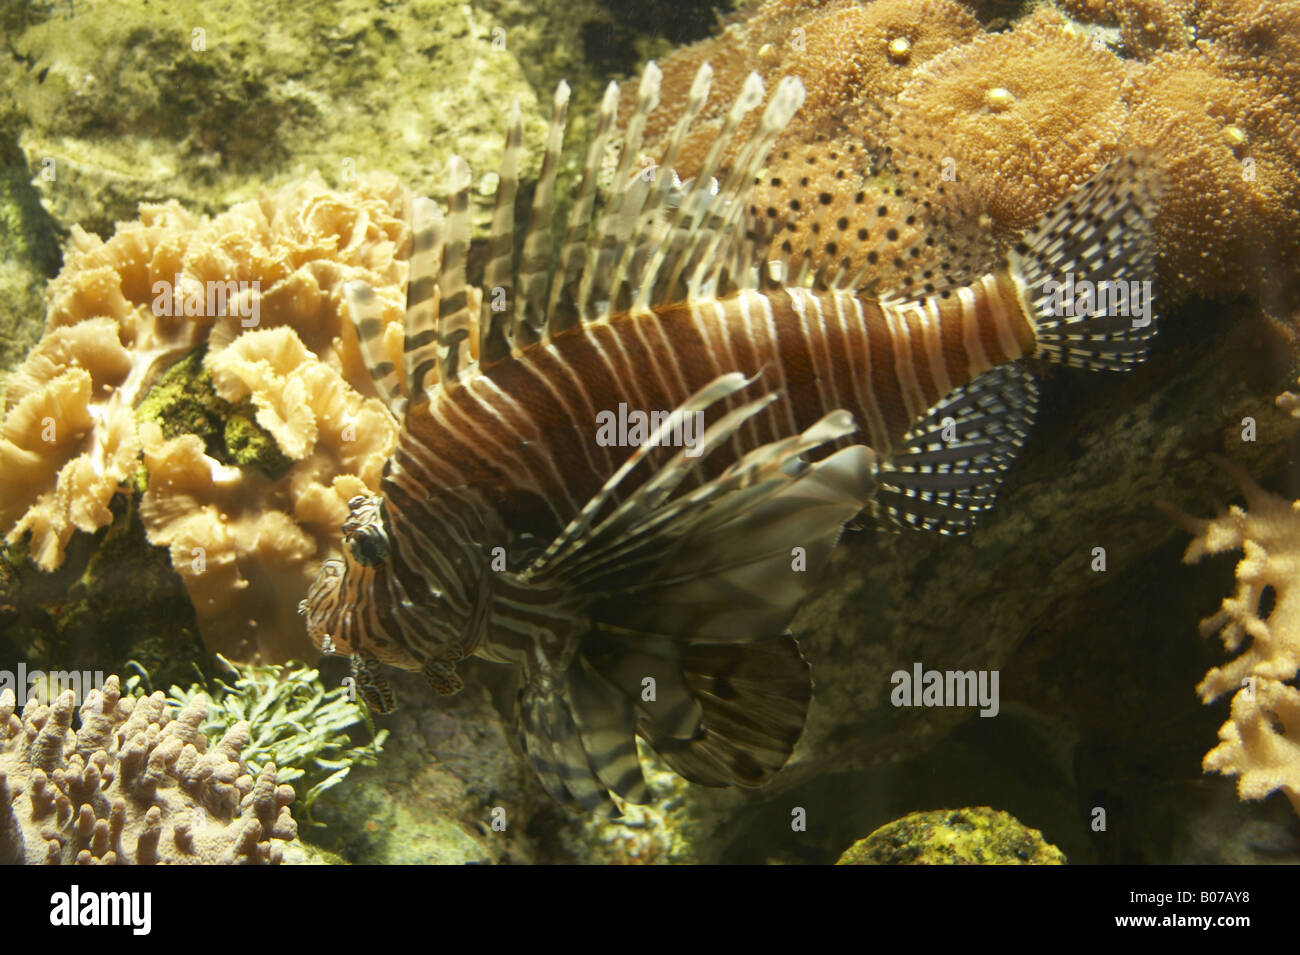 Lionfish swimming on corals Stock Photo